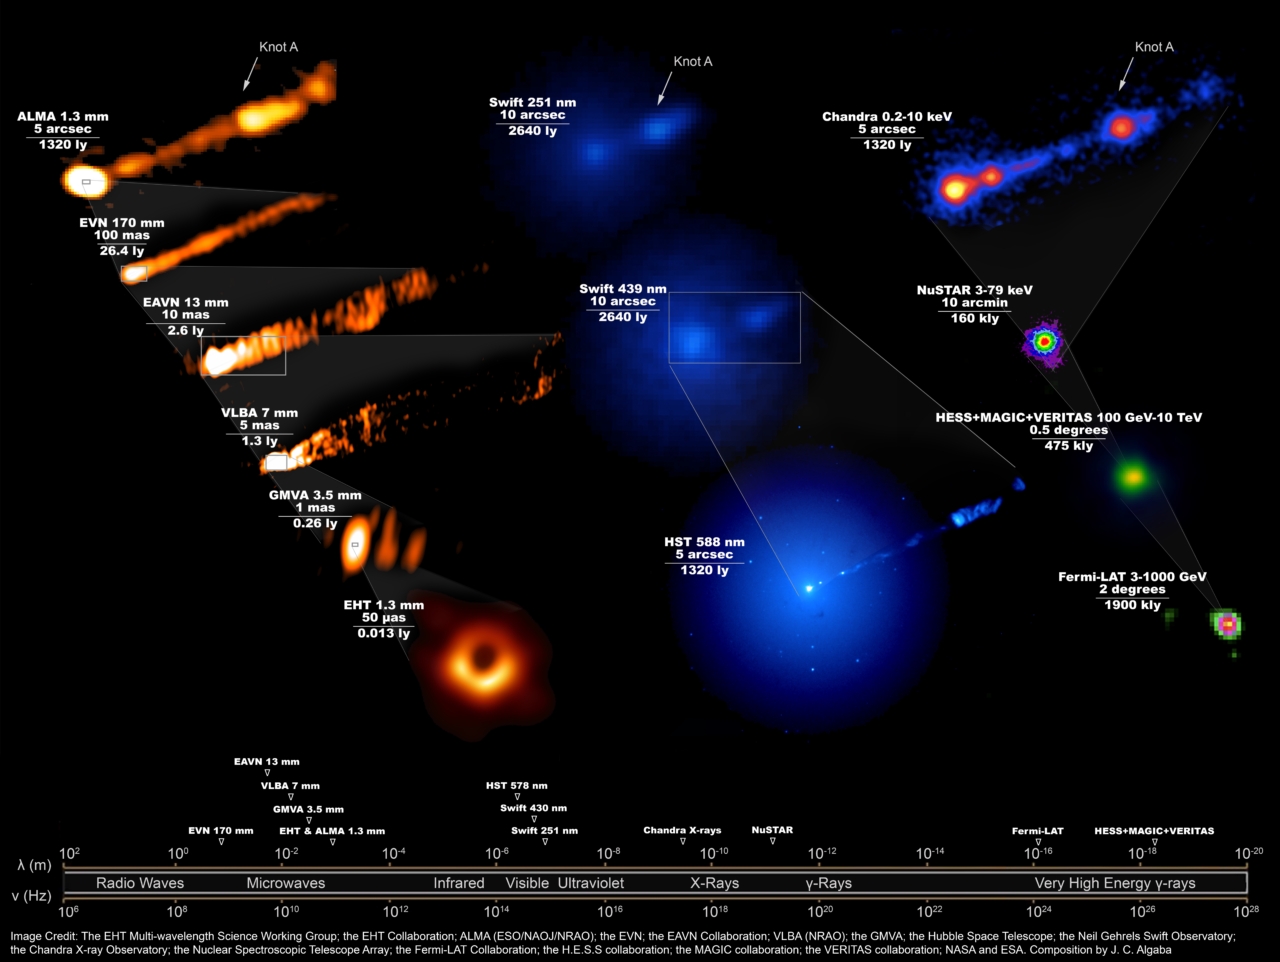 VIDEO: Multi-wavelength Observations Reveal Impact of Black Hole on M87 Galaxy